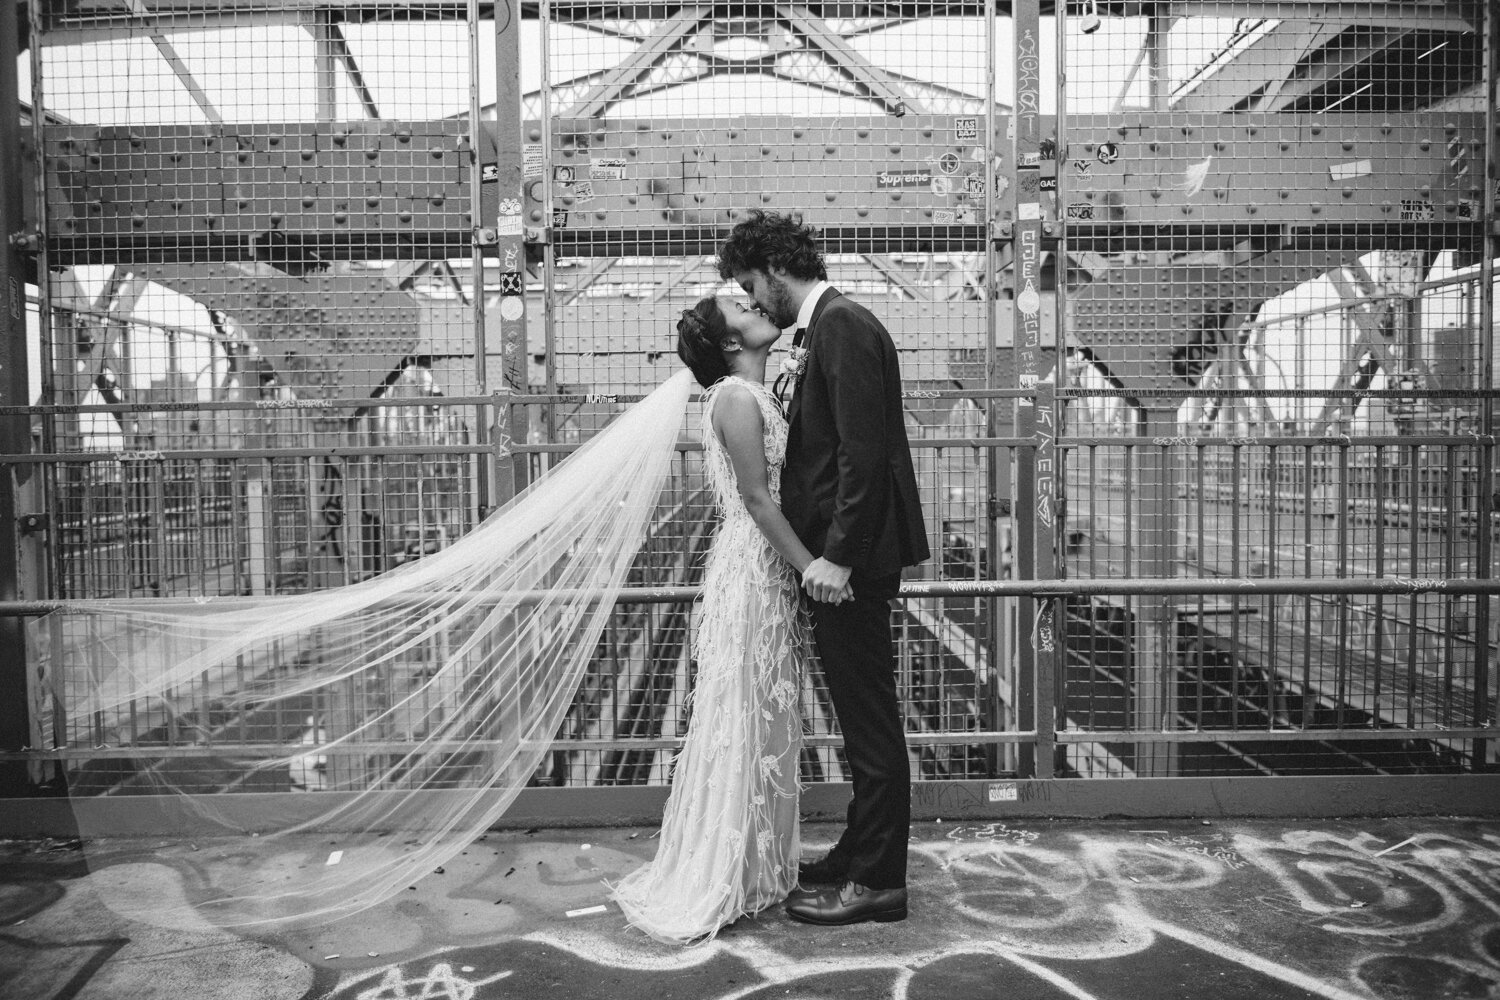 Bride and groom stand facing each other on the Williamsburg Bridge holding hands and they kiss. Her veil is blowing in the wind behind her.

Central Park Wedding Photography. Williamsburg Bridge Bridal Portraits. Luxury NYC Wedding Photographer. Manhattan Micro Wedding.